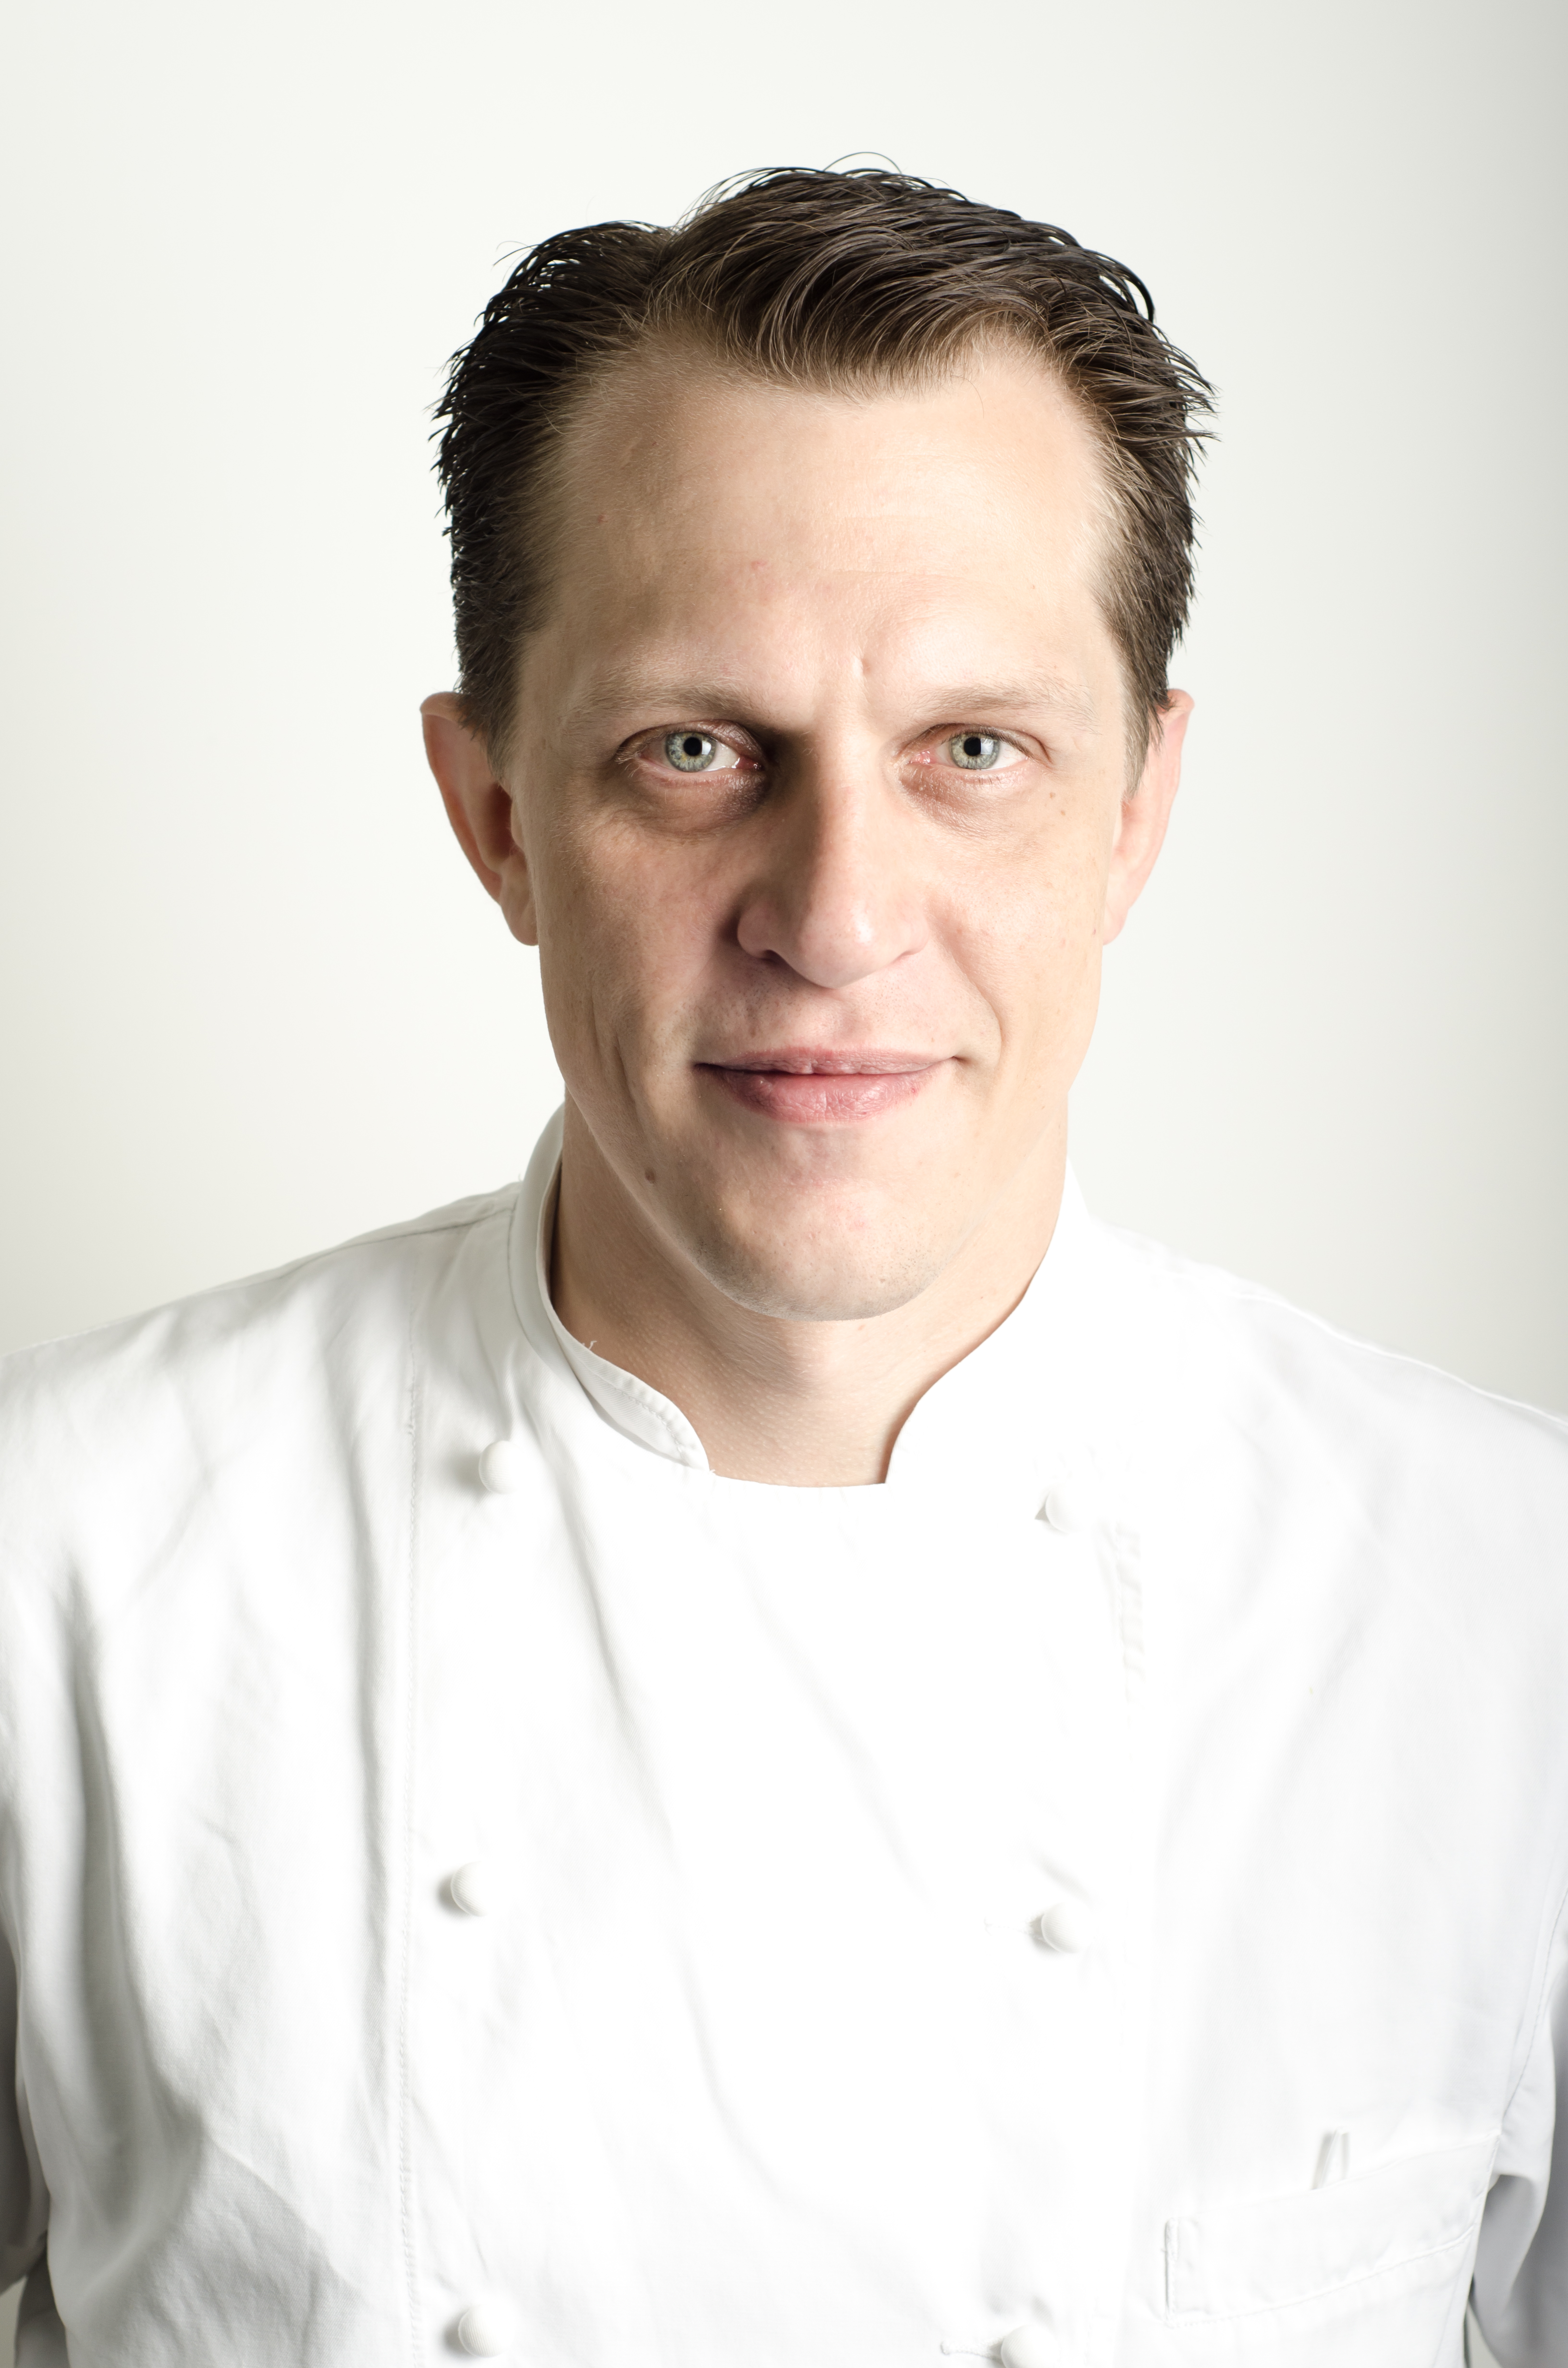 Pastry Chef and ICE Creative Director Michael Laiskonis